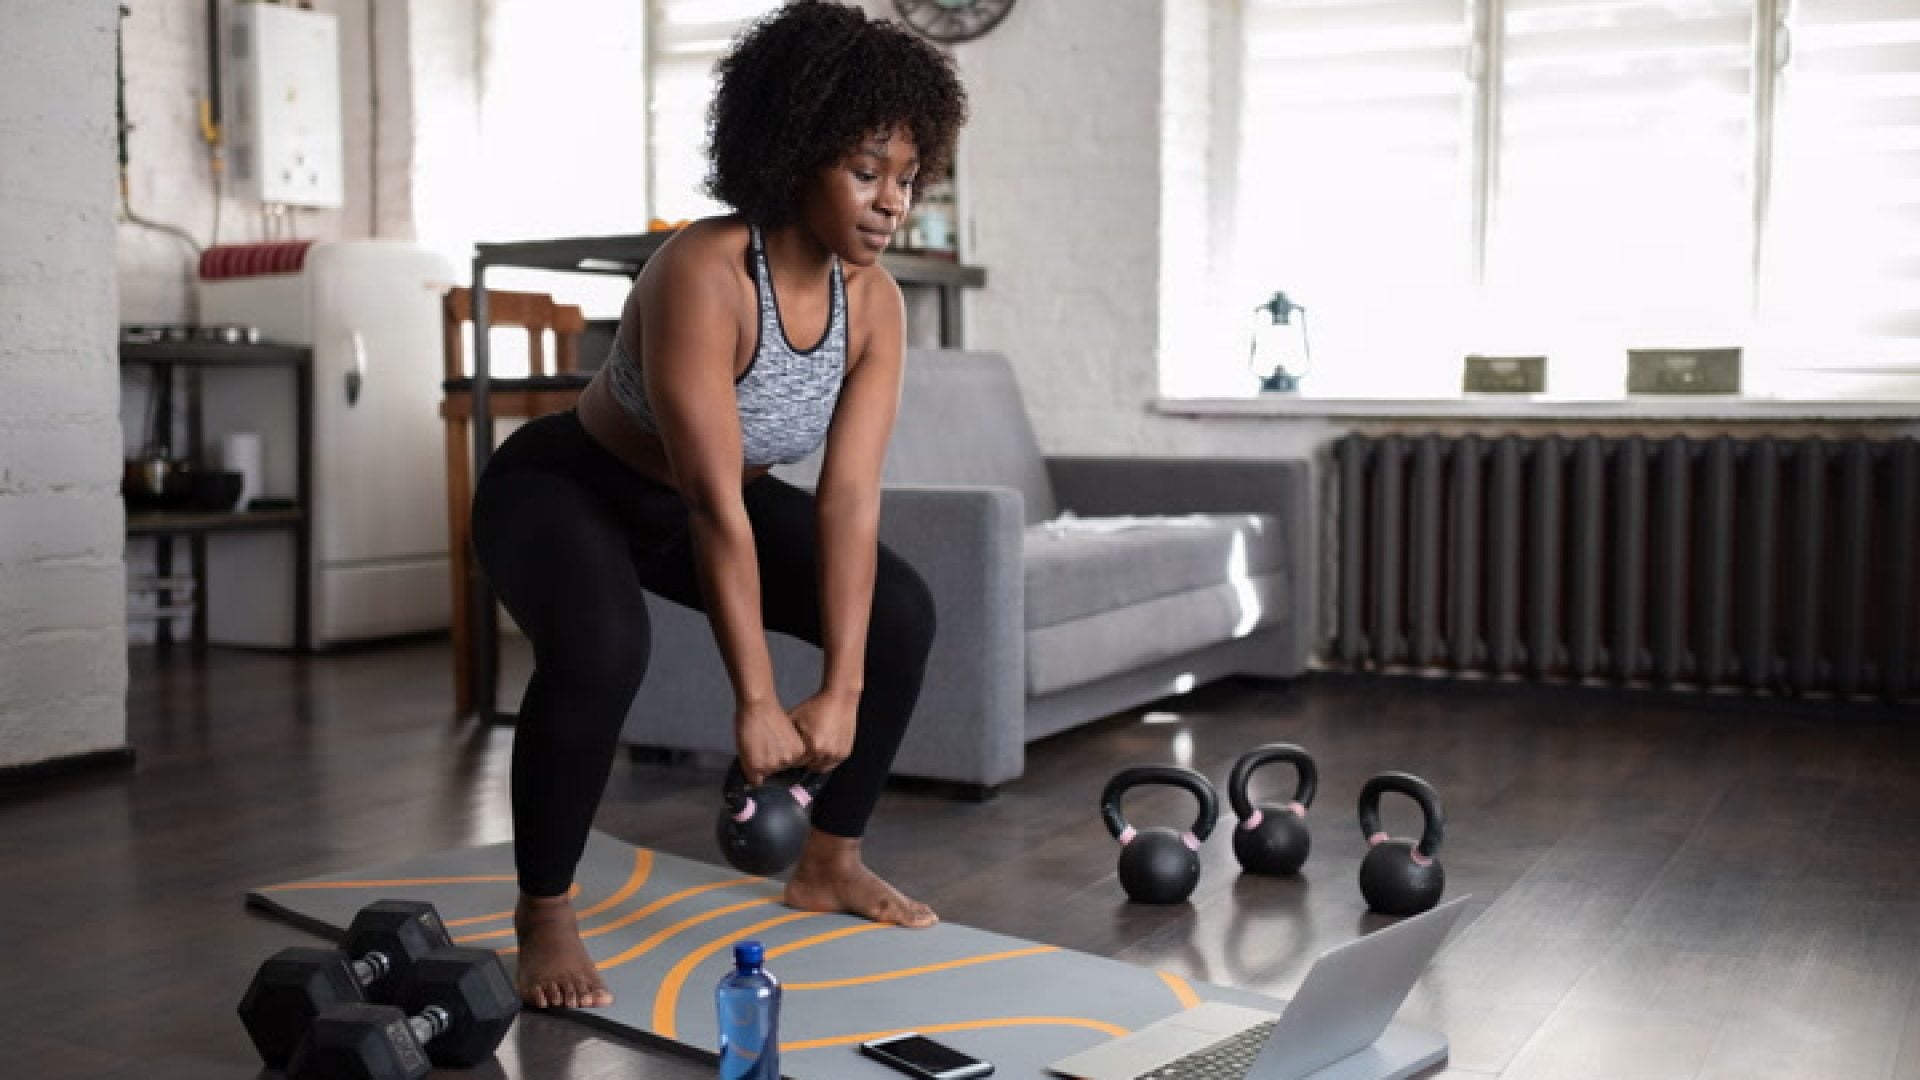 WATCH: In My Feed – Low-Lift Exercises To Get Legs Like Halle Berry